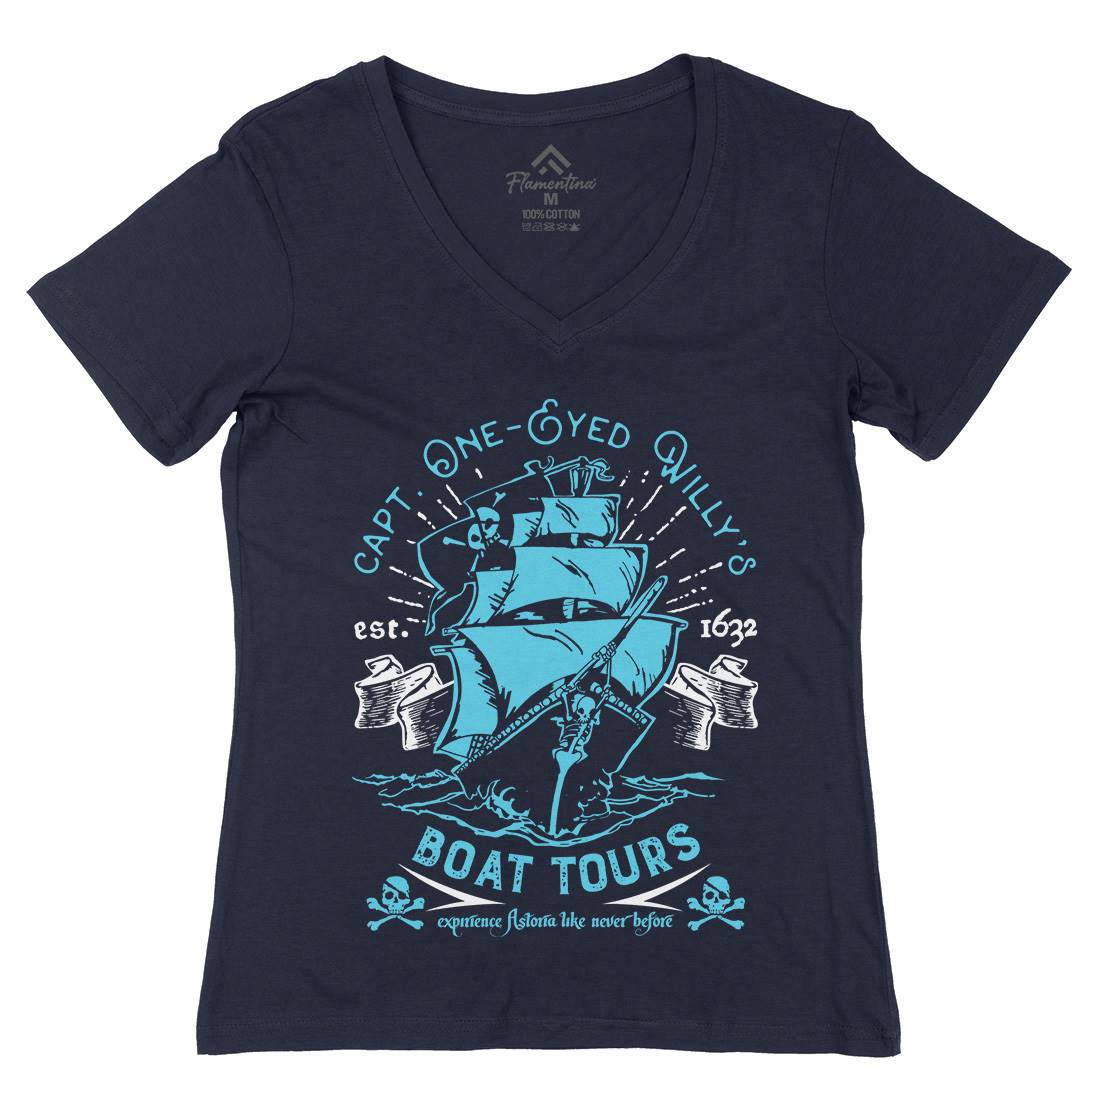 One-Eyed Willys Boat Tours Womens Organic V-Neck T-Shirt Horror D160